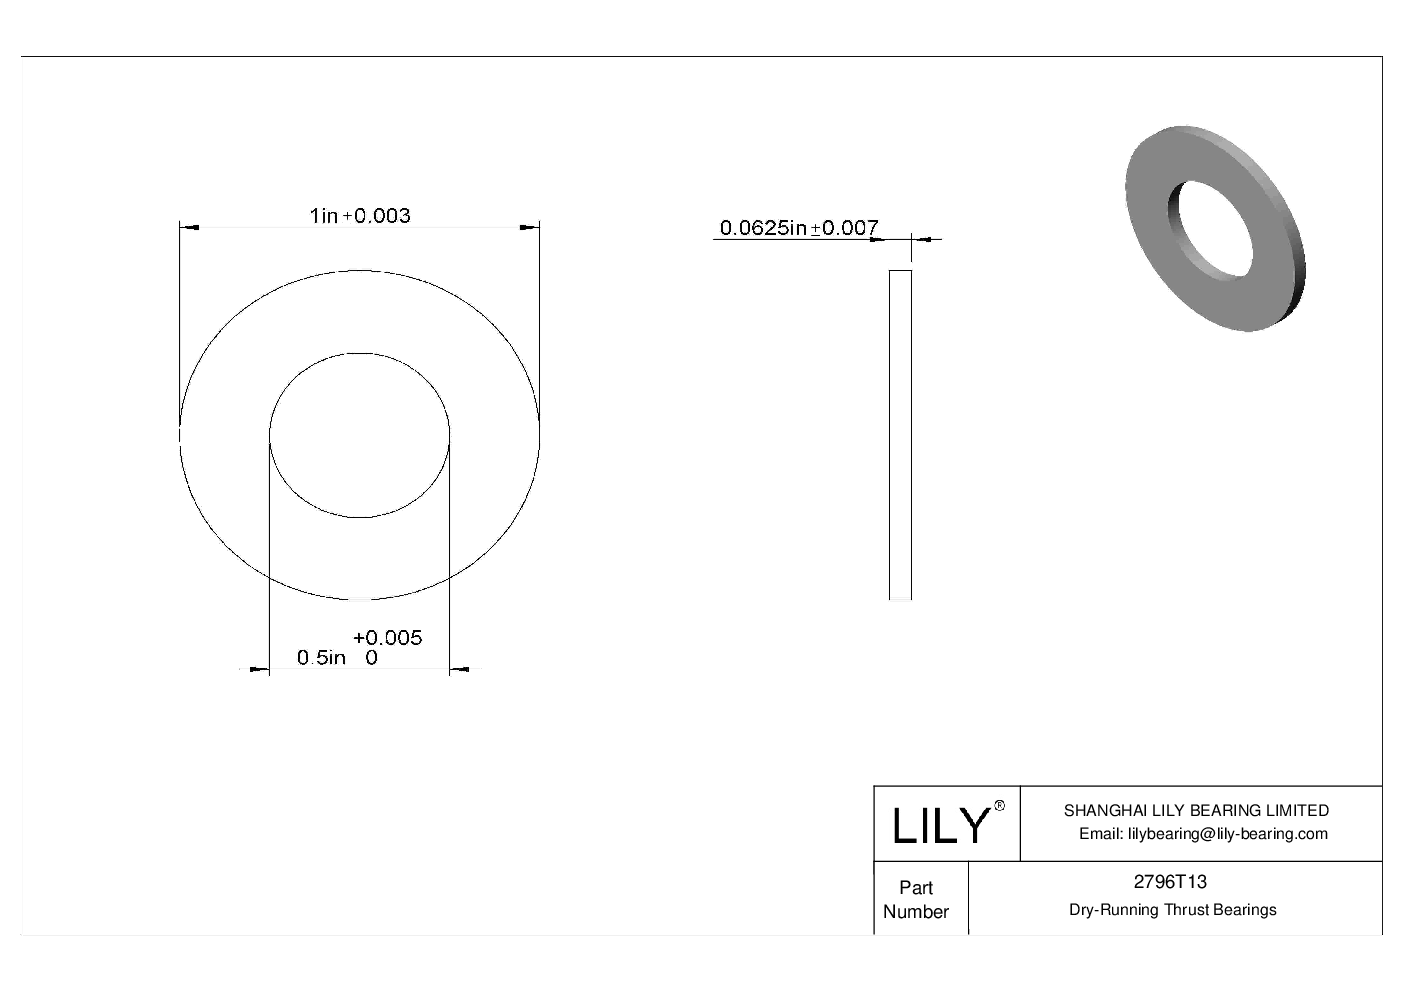 CHJGTBD Ultra-Low-Friction Dry-Running Thrust Bearings cad drawing